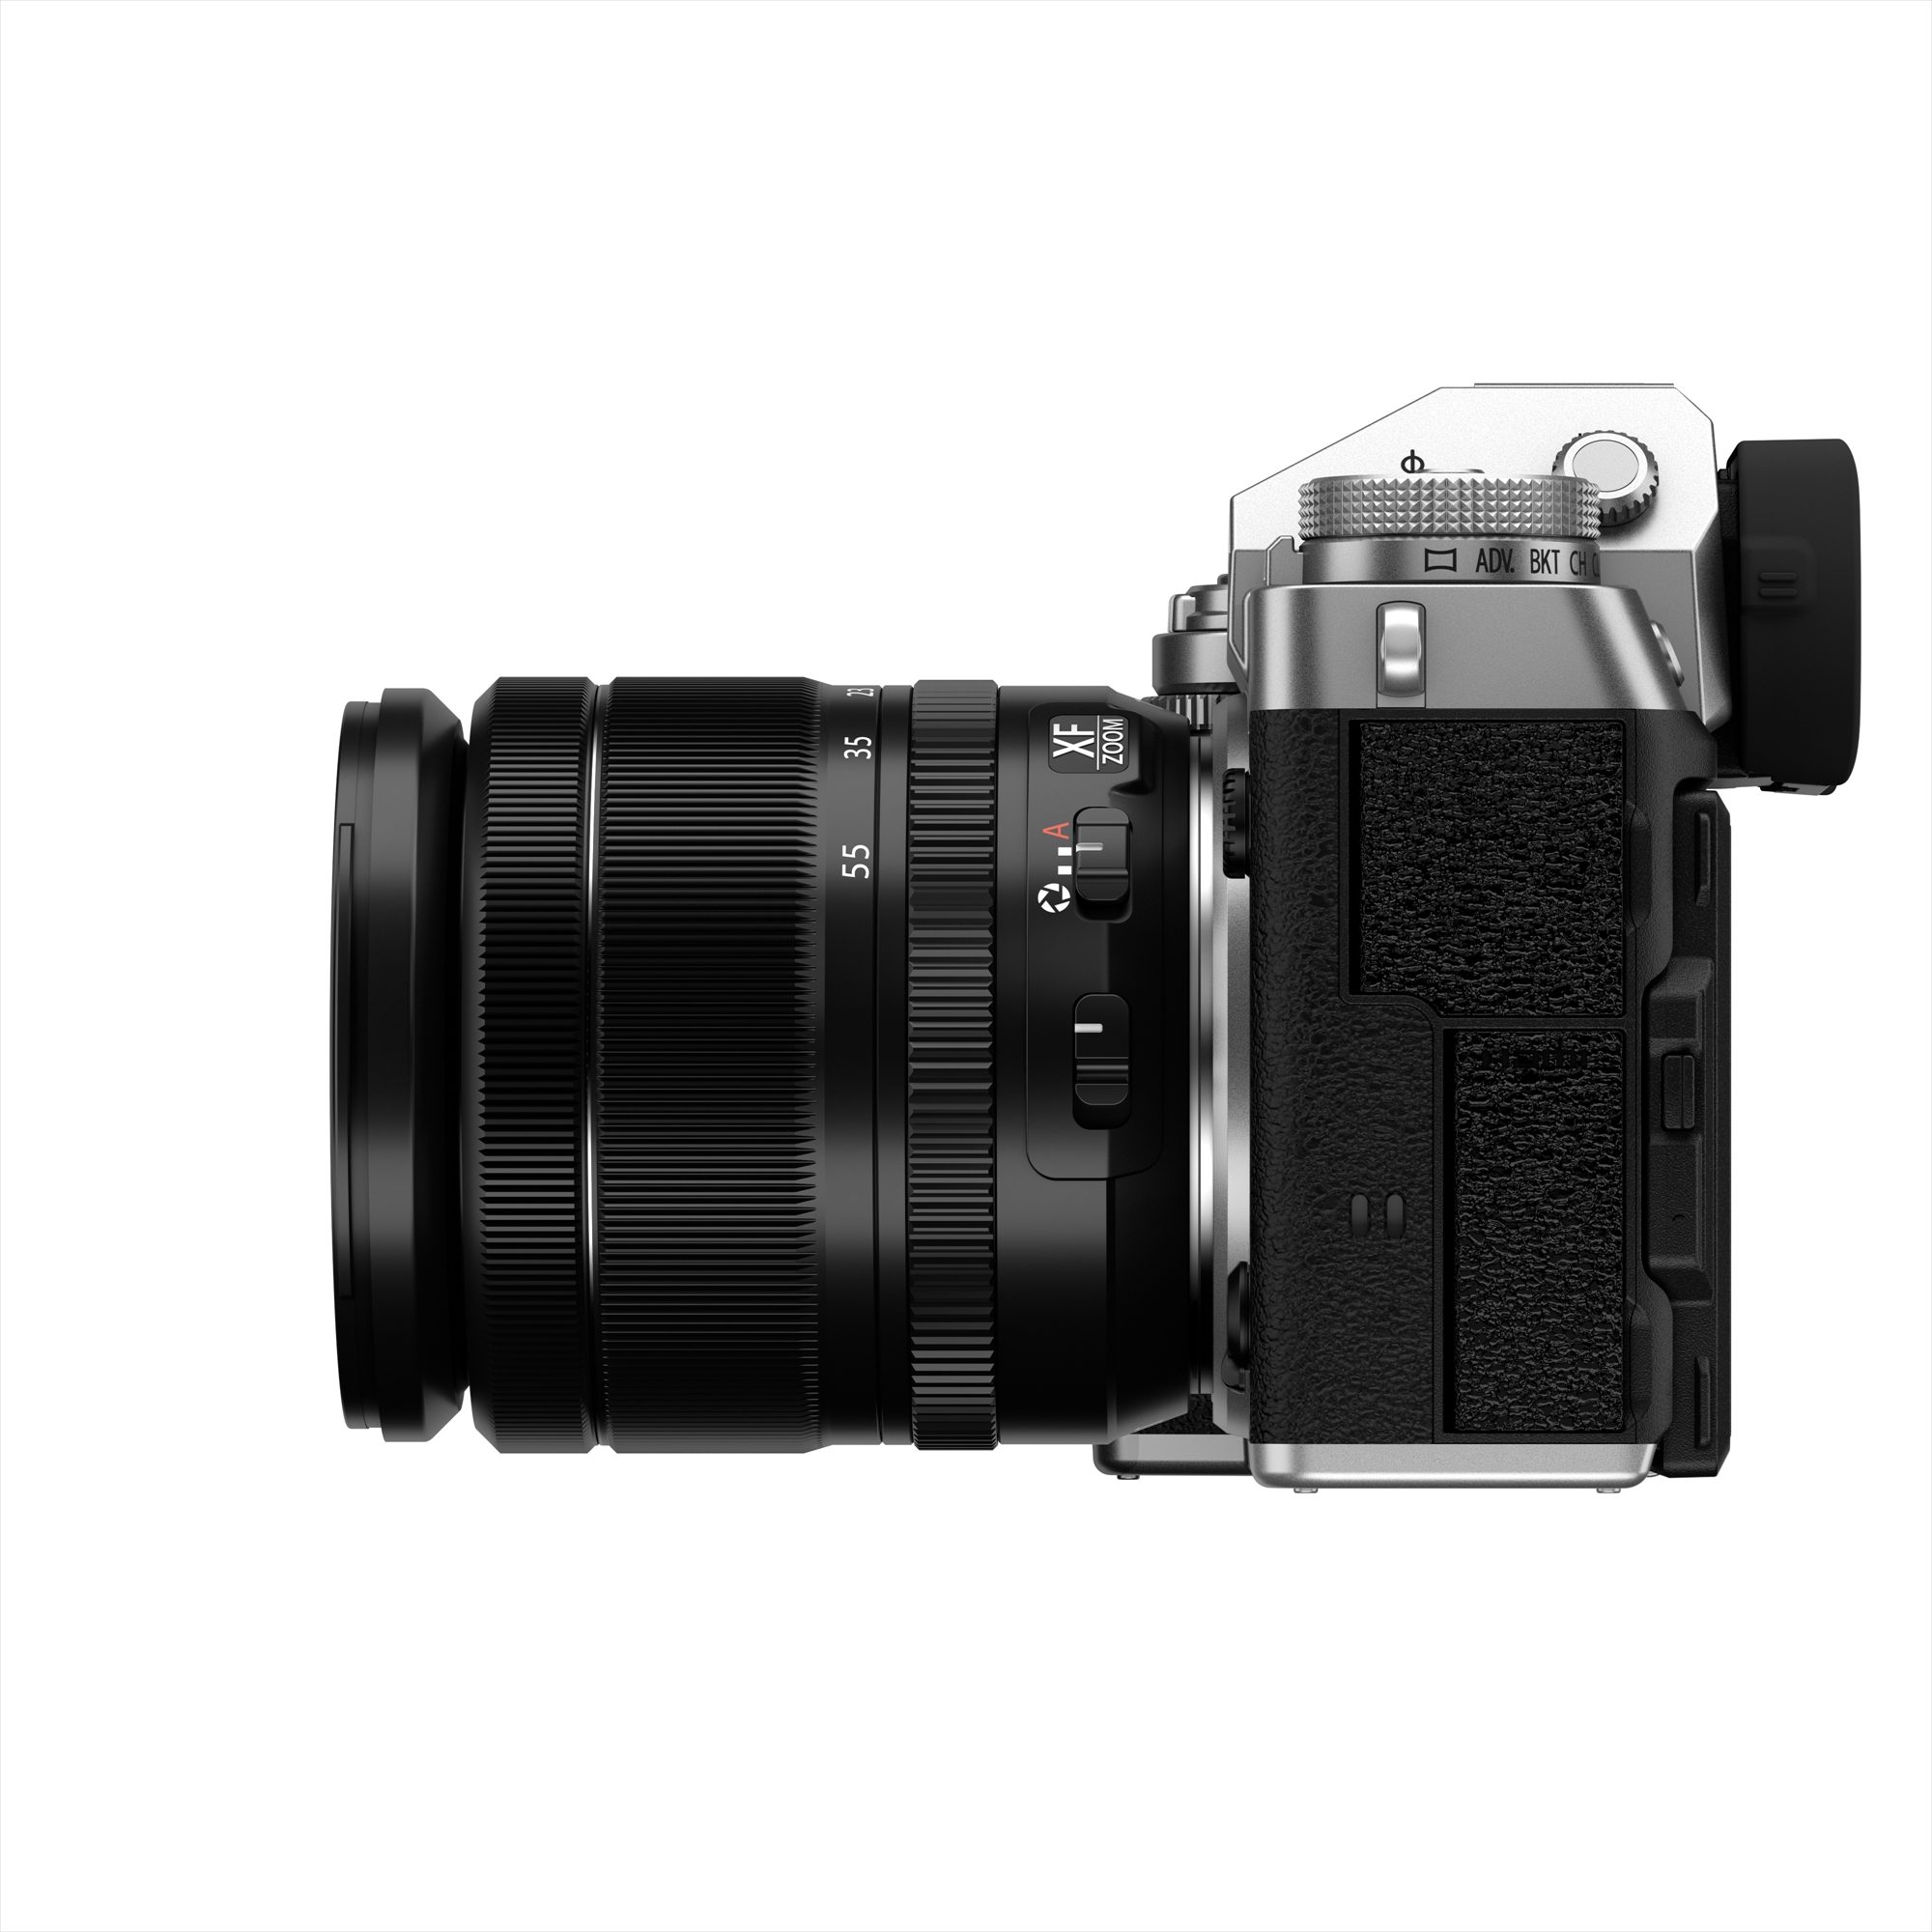 Fujifilm X-T5 Kit with 18-55mm lens (Silver)